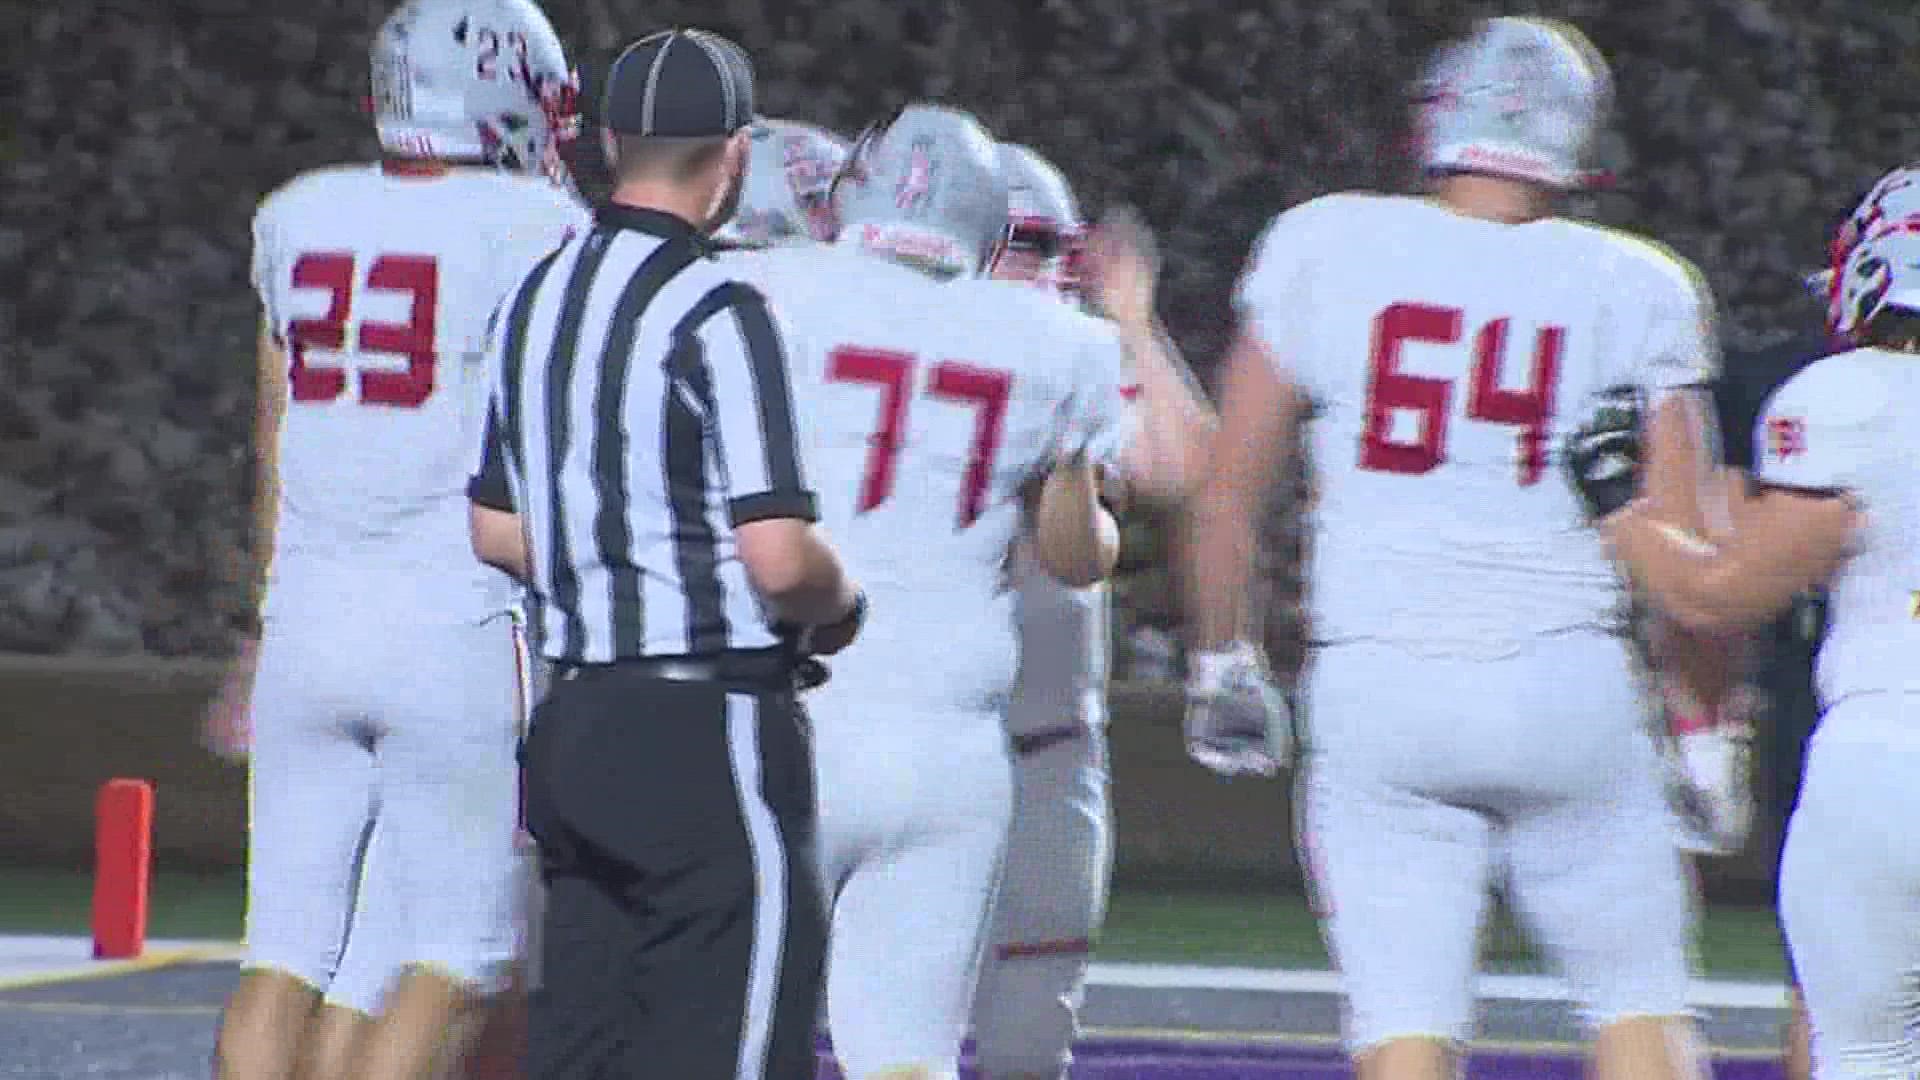 North Scott Football improves to 6-0 after beating Burlington. The Lancers are the #1 team in class 4A.